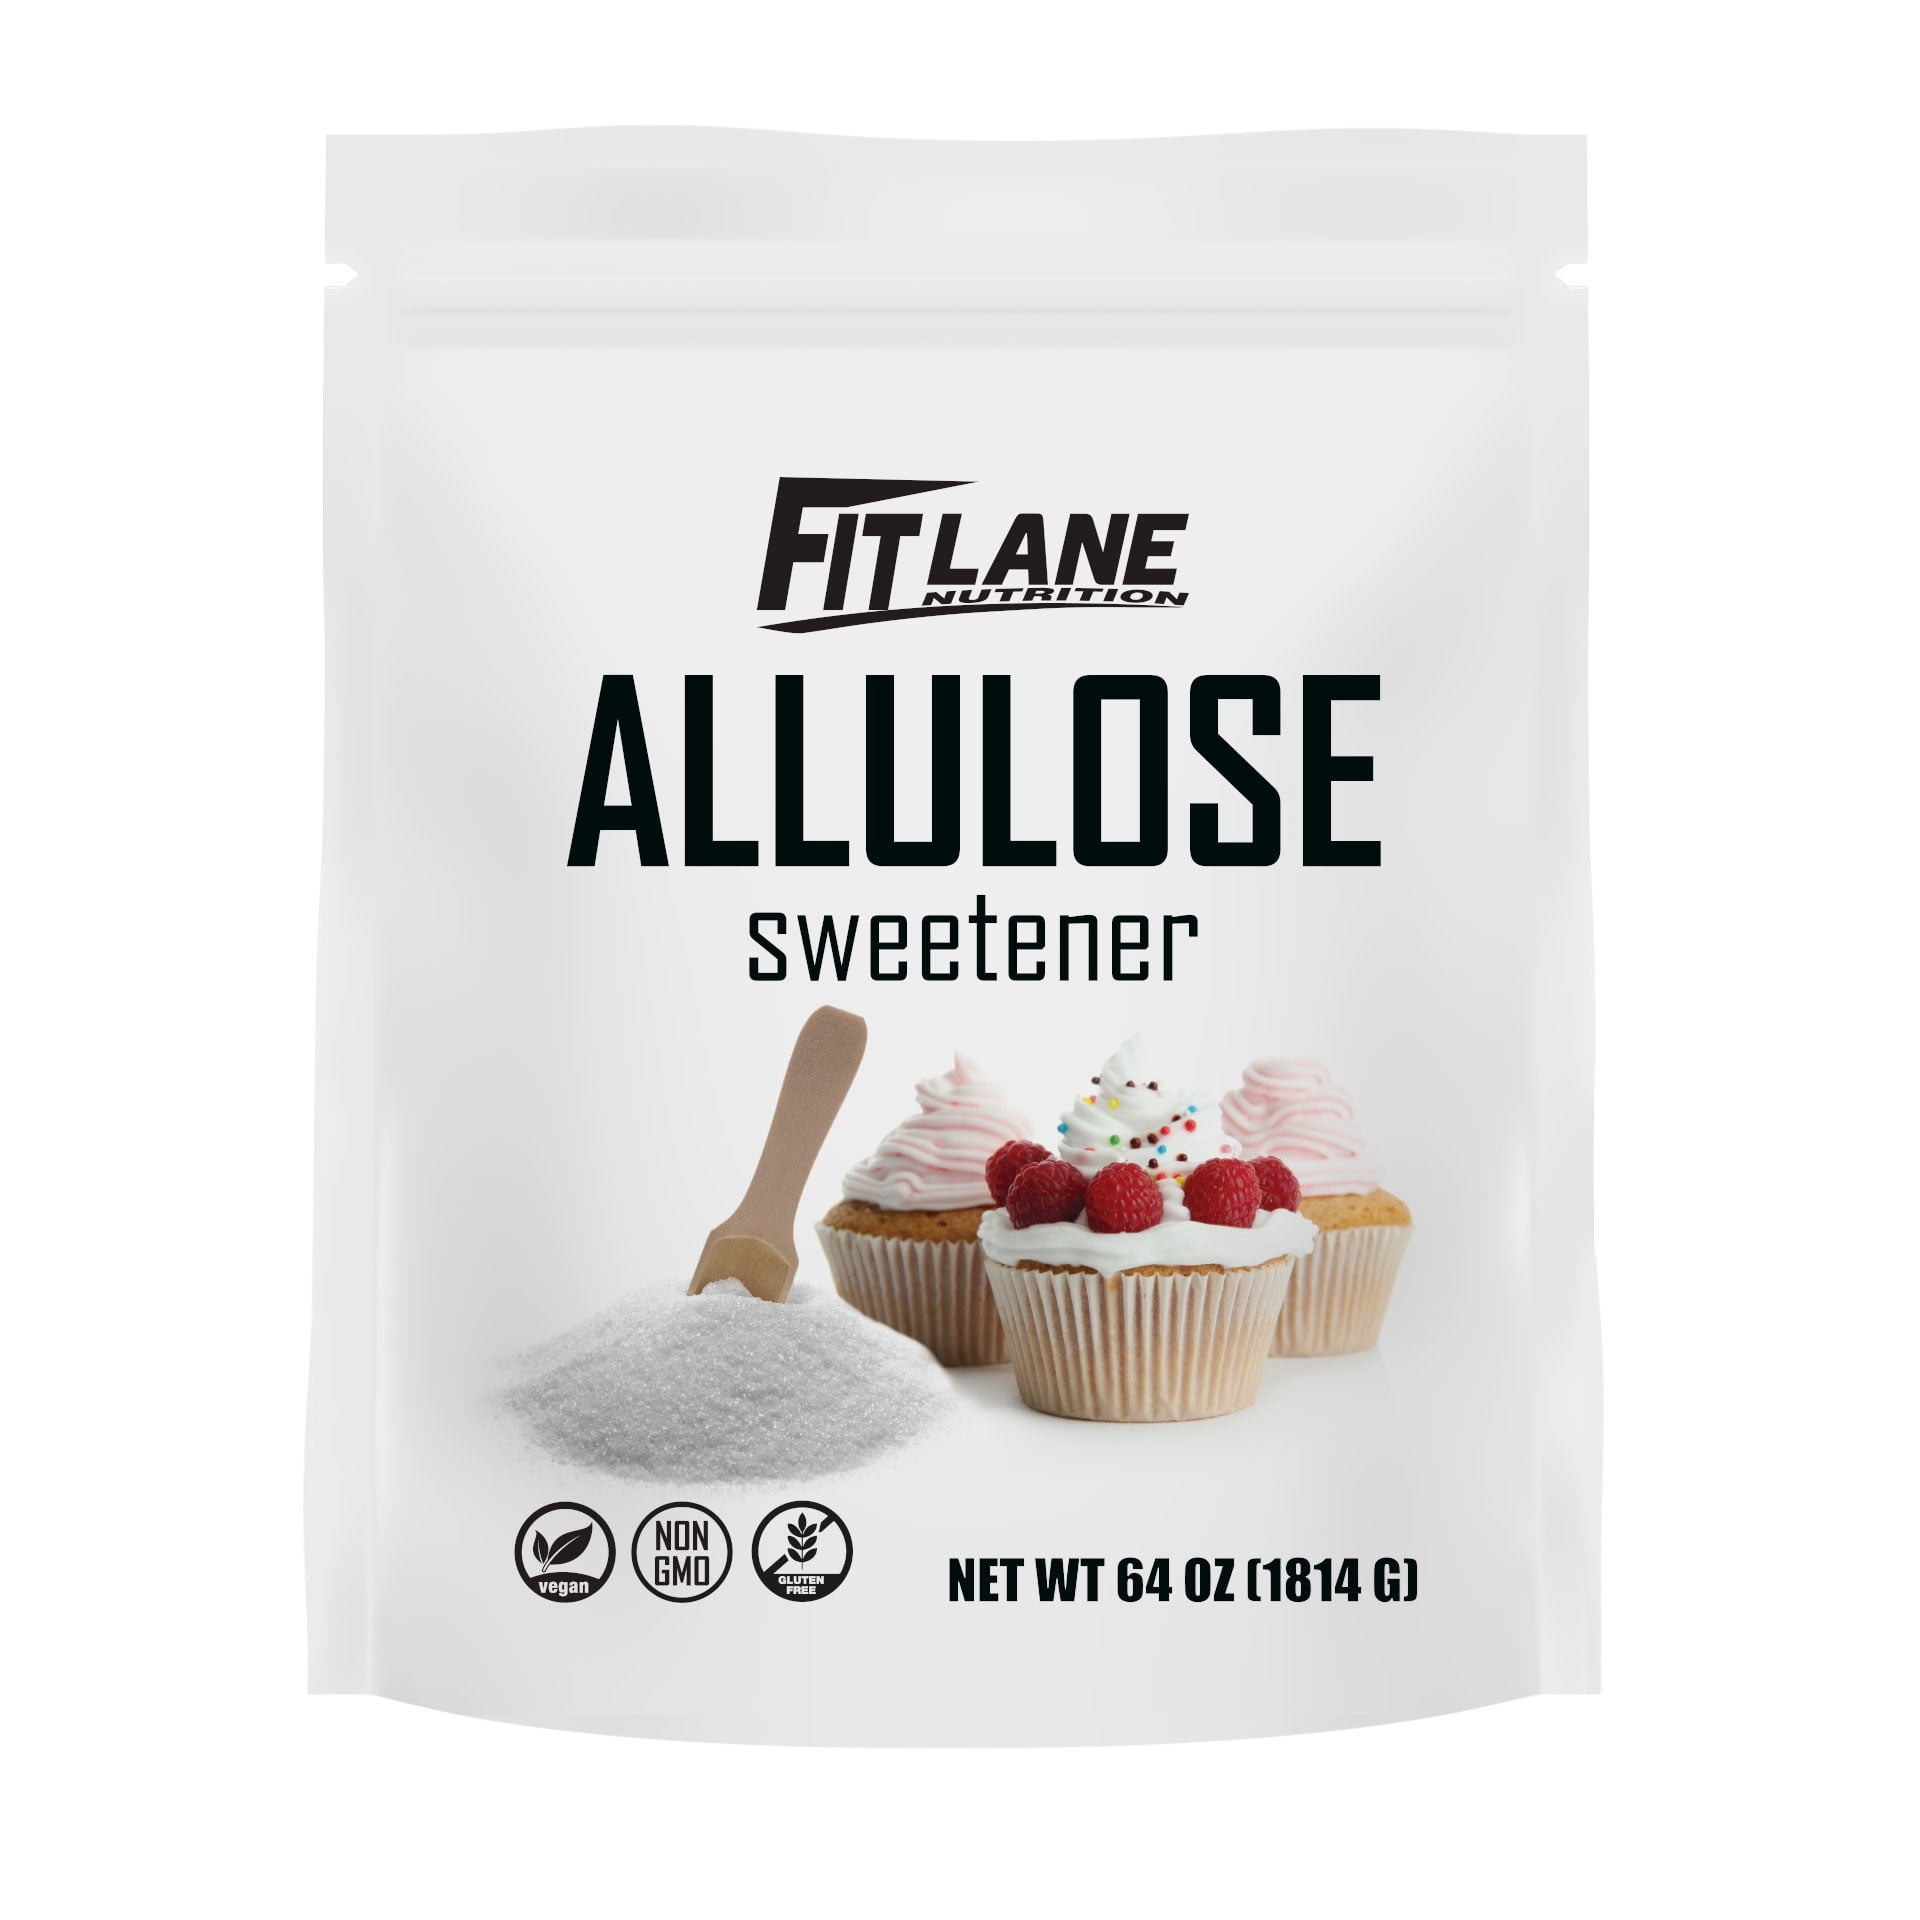 All About Allulose Sweetener – PlanetBake